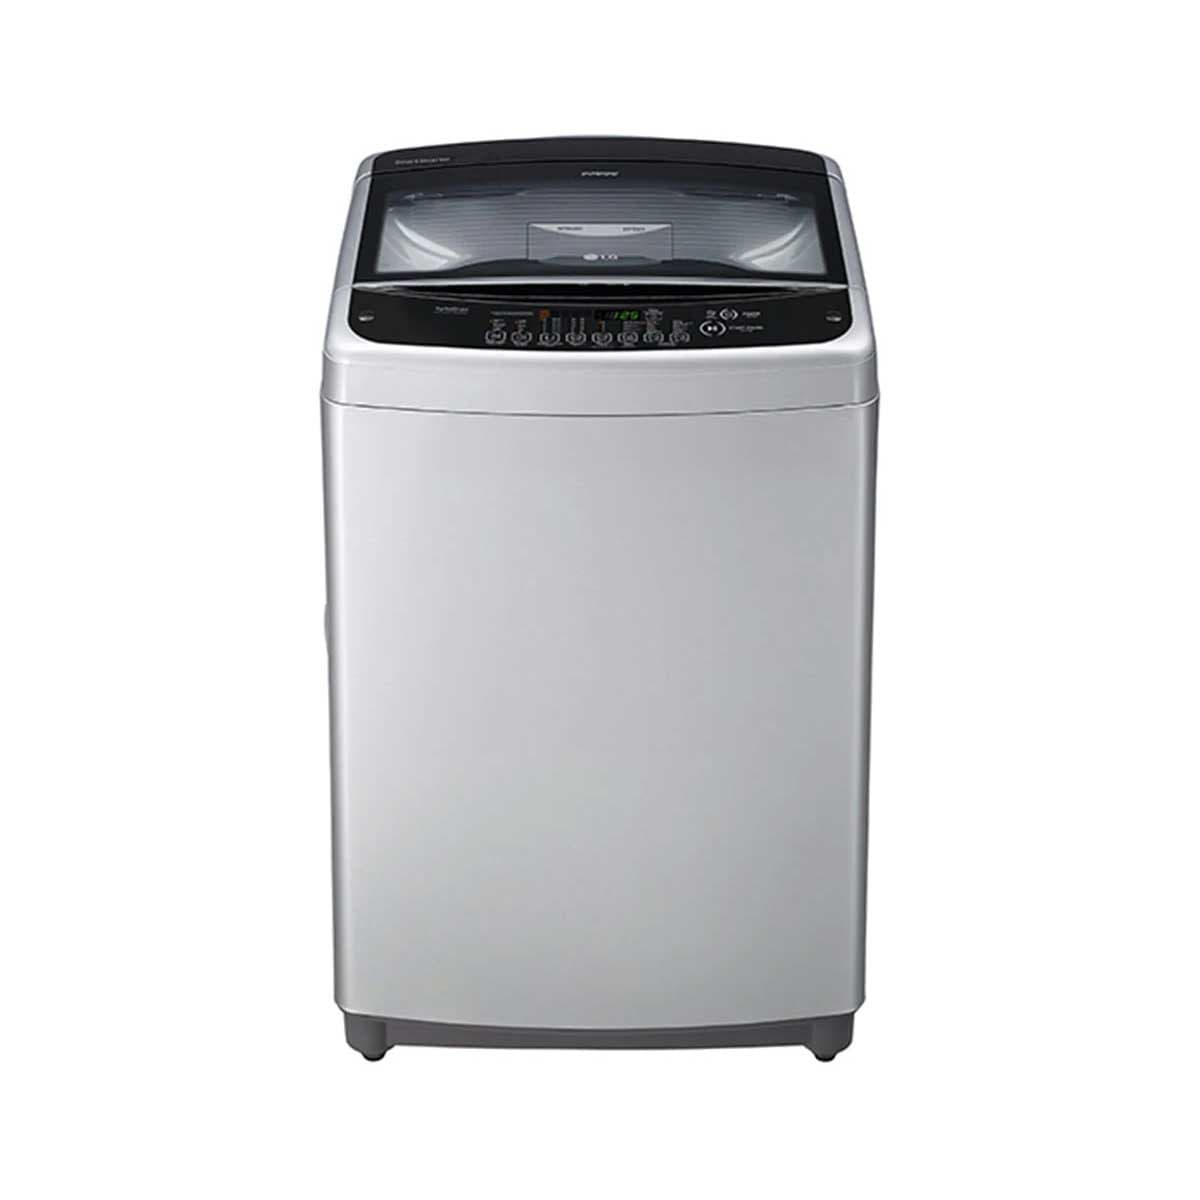 Decakila Single Tub Washing Machine - KEDM004W | Buy Online in Accra, Ghana - Supply Master Home Accessories Buy Tools hardware Building materials